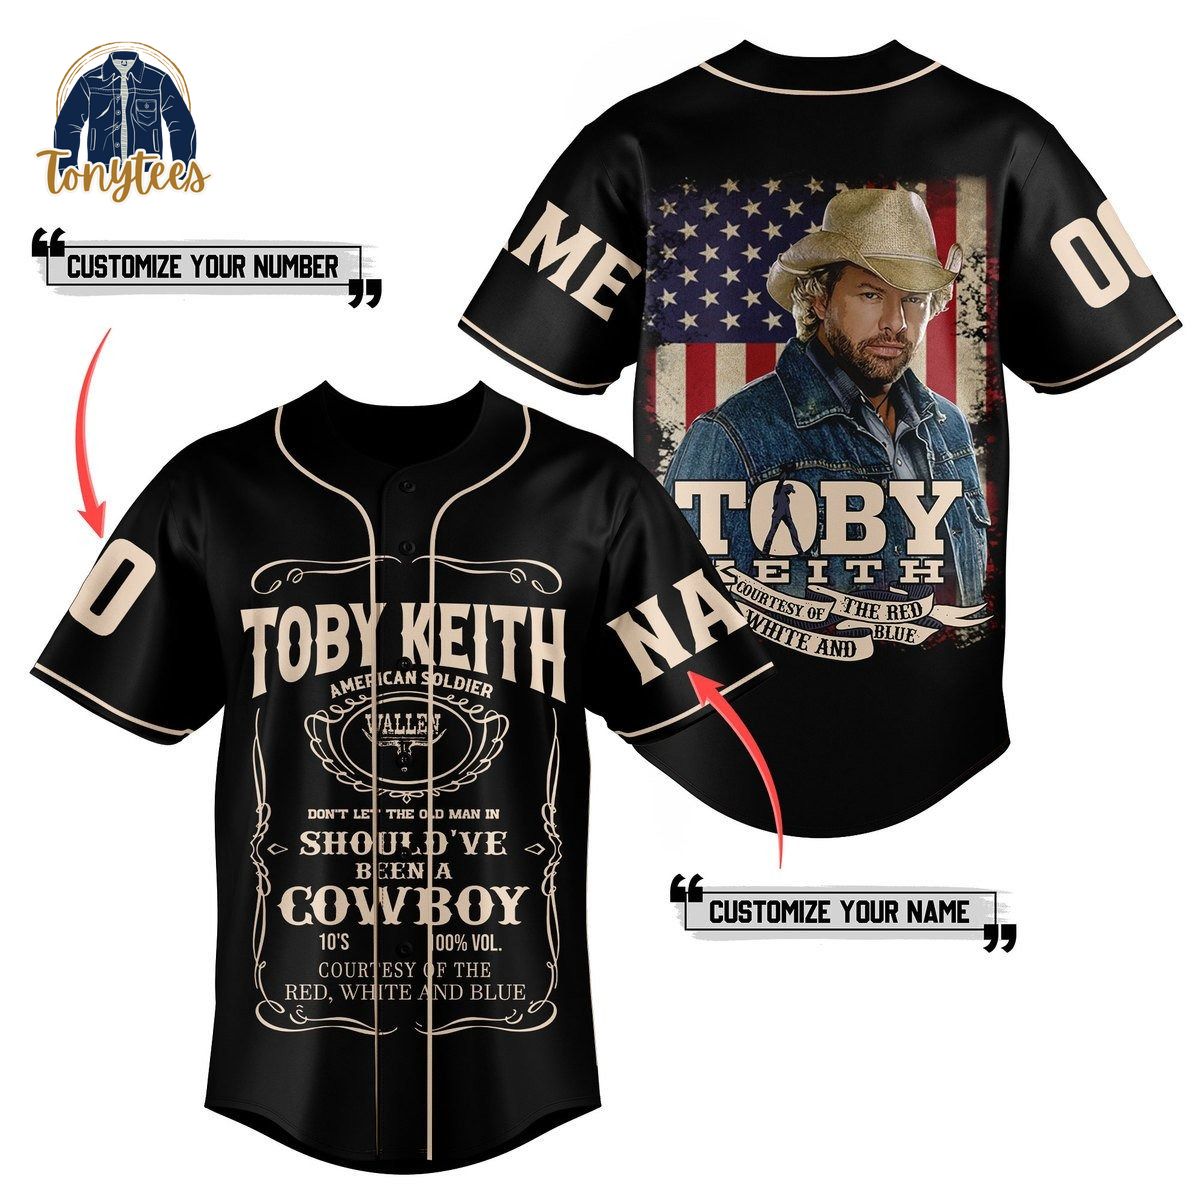 Toby Keith courtesy of the red white and blue custom name baseball jersey